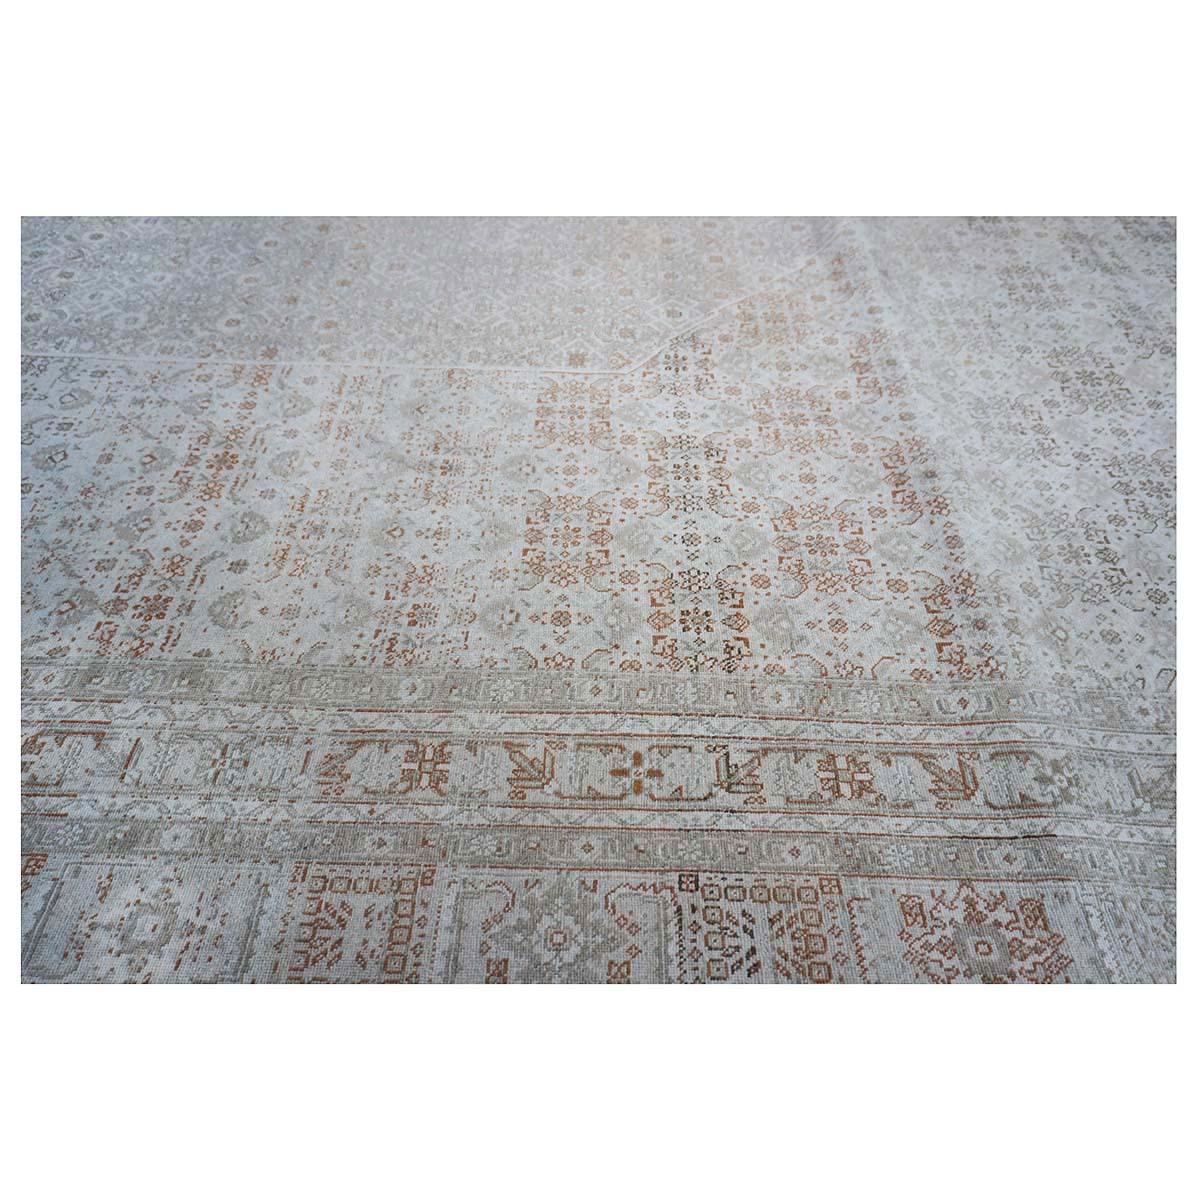 Antique Shabby Chic Distressed Persian Tabriz 13x18 Ivory & Tan Handmade Rug In Distressed Condition For Sale In Houston, TX